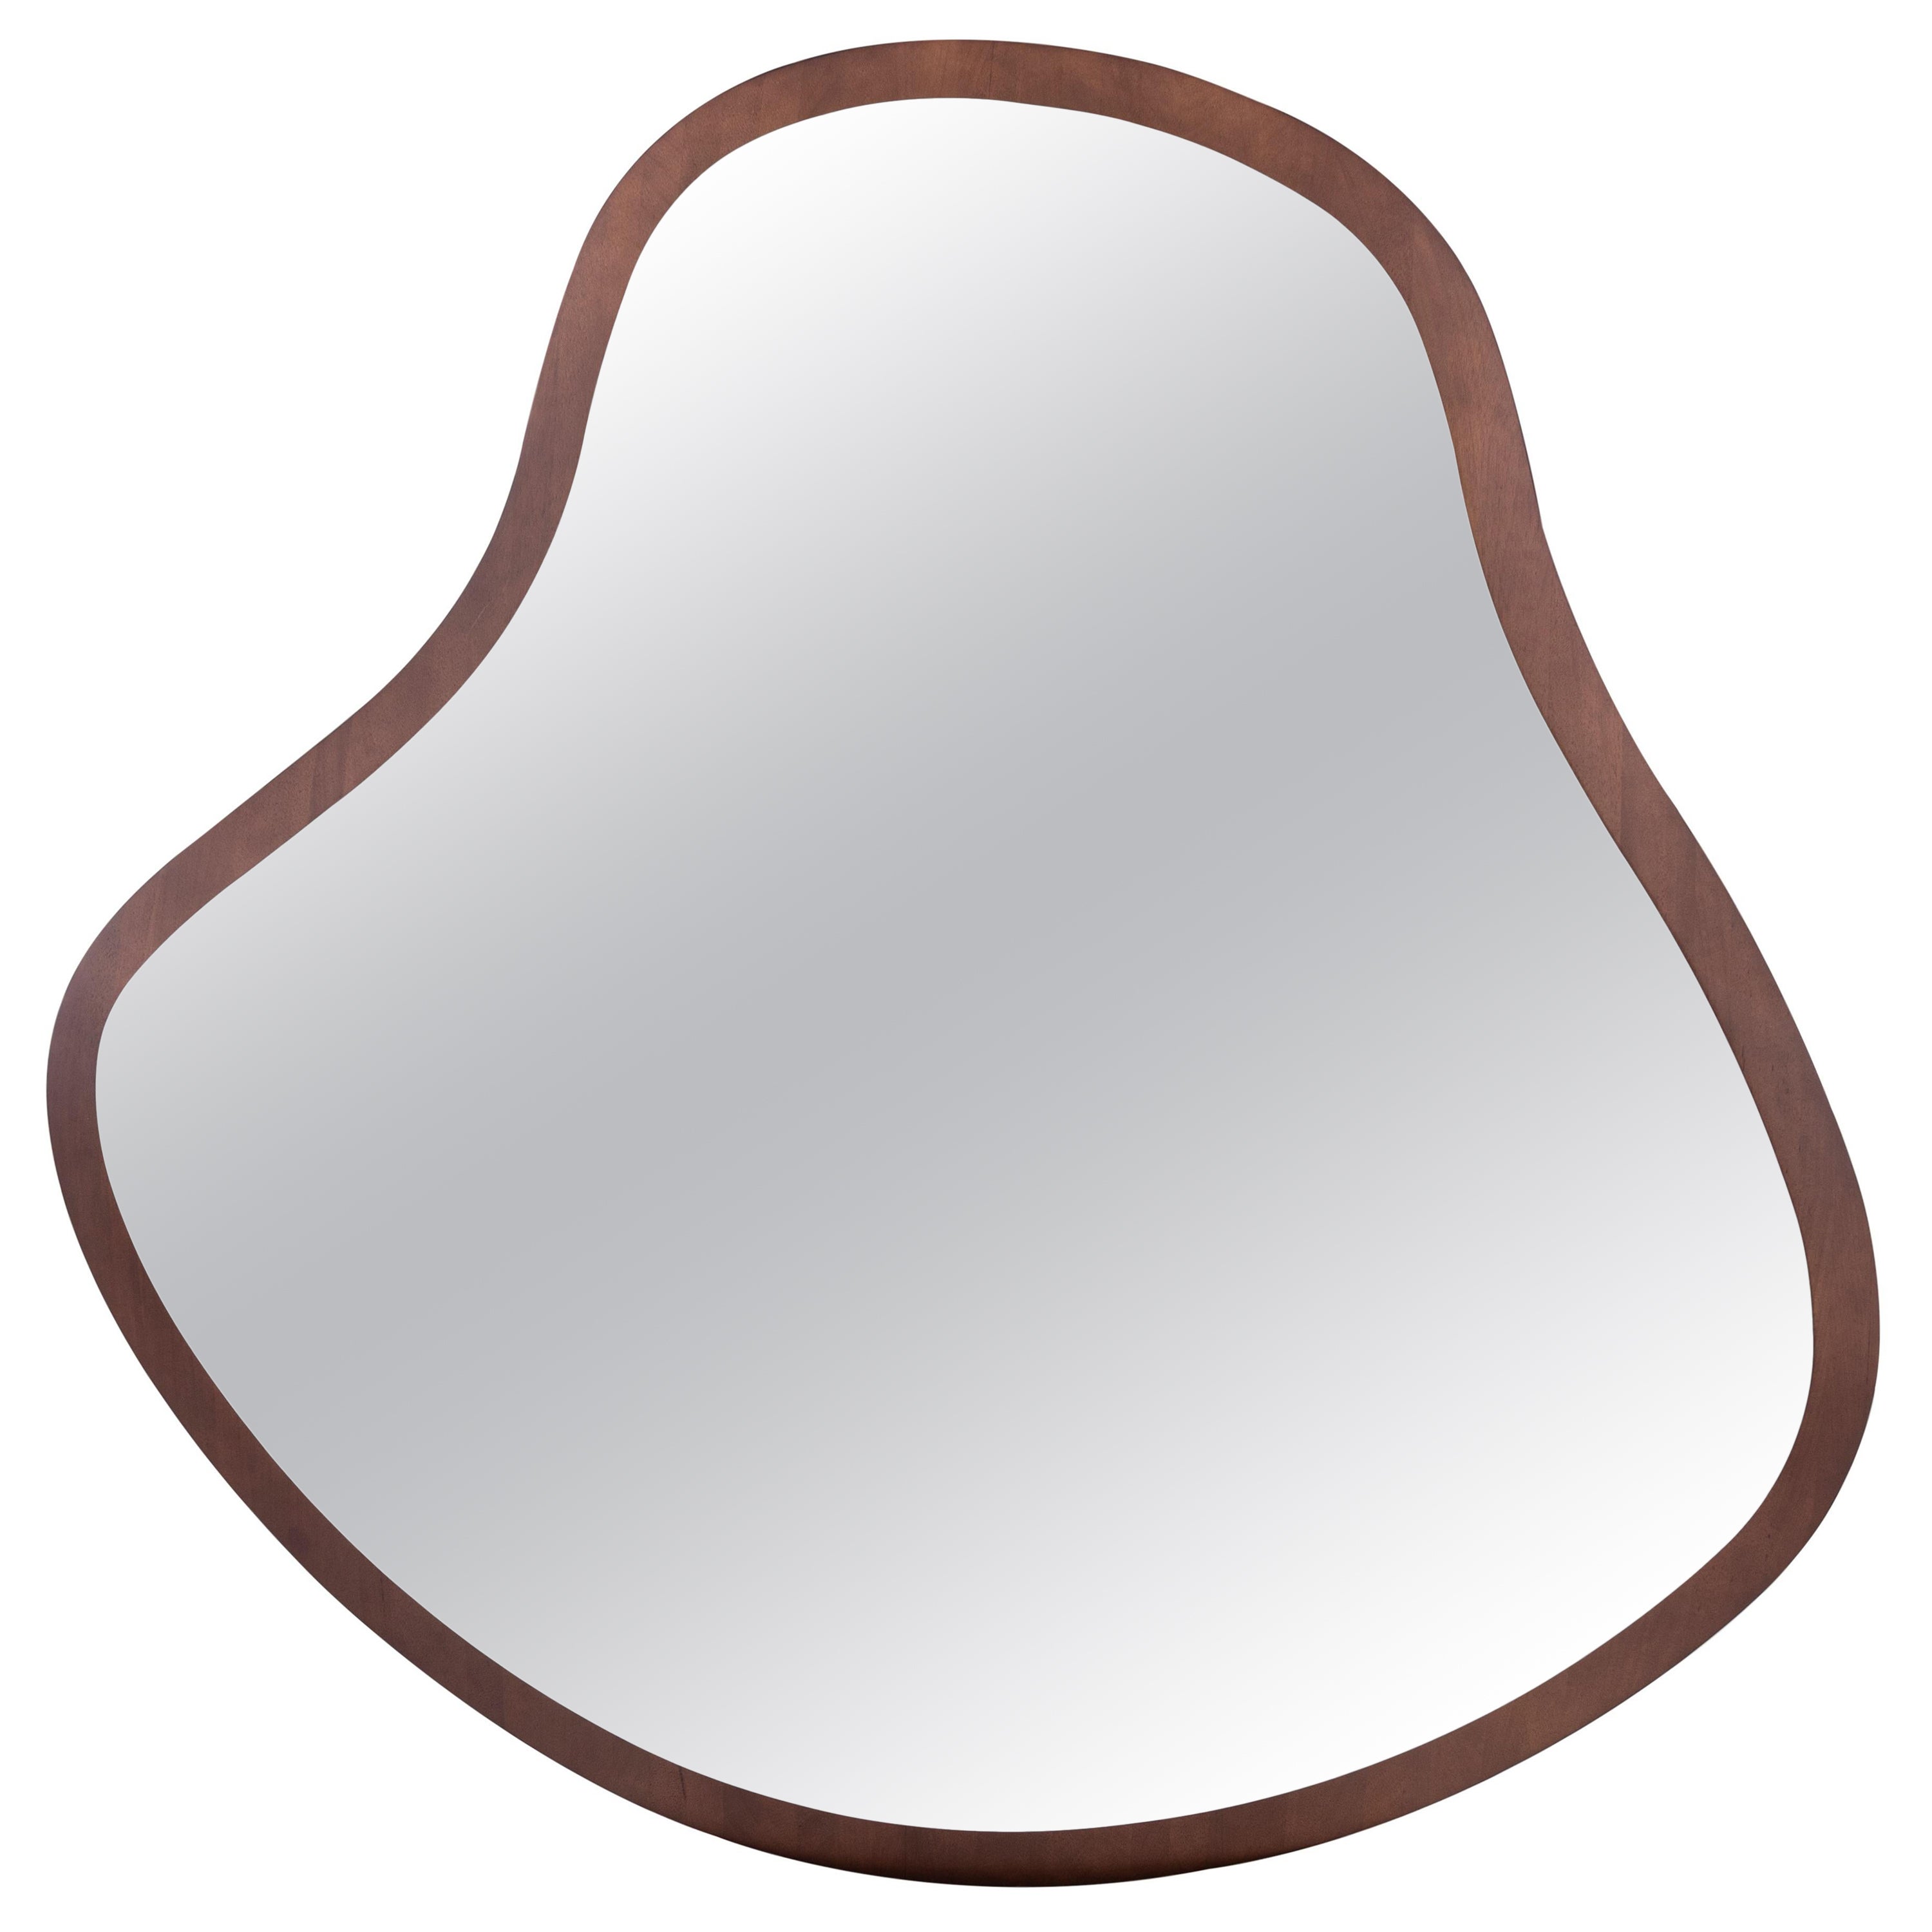 Pante Mirror In Walnut Wood Finish Individual For Sale